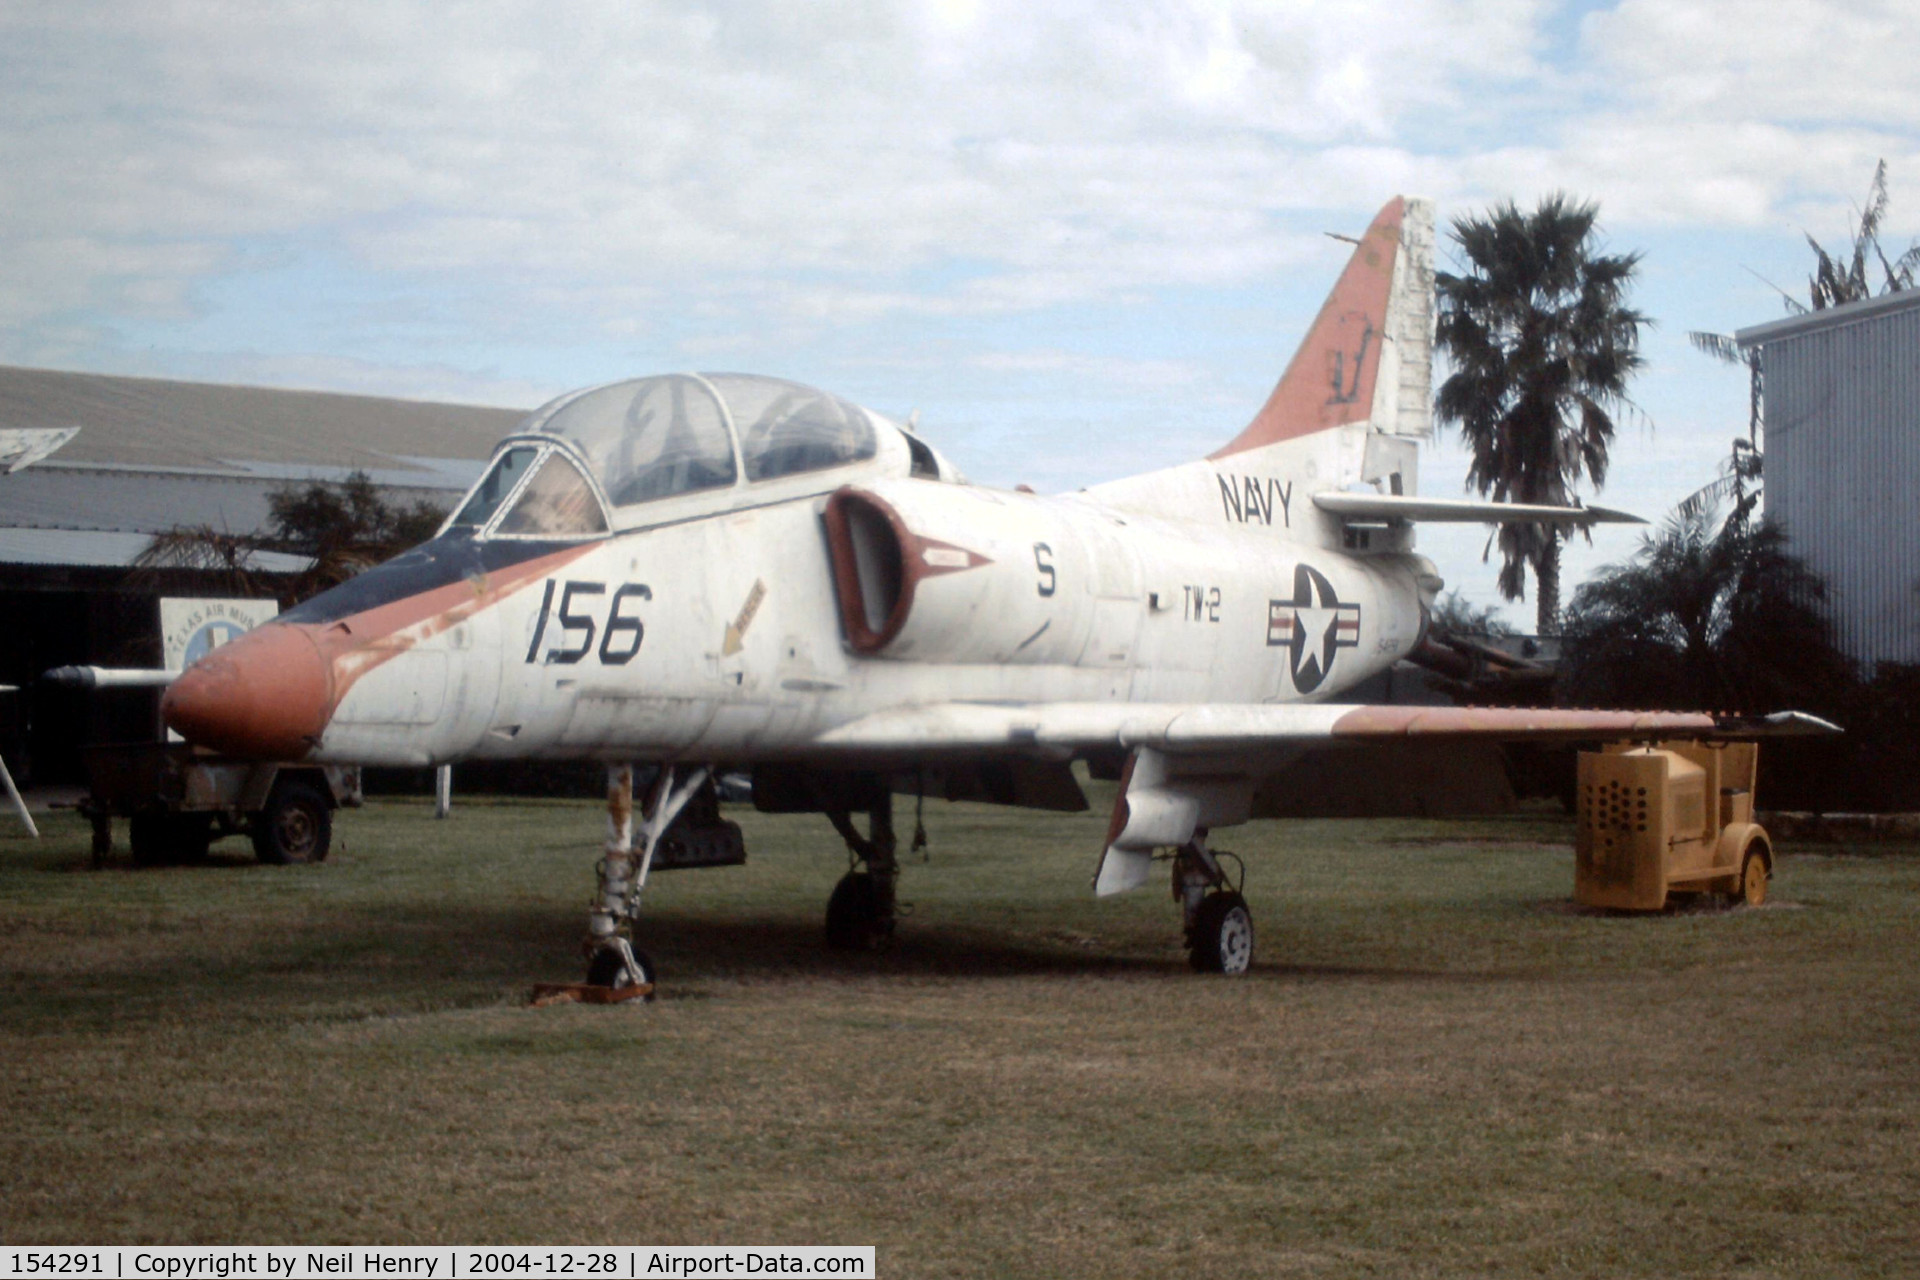 154291, Douglas TA-4J Skyhawk C/N 13679, Scanned from slide taken at (now closed) Rio Hondo Air Museum, Texas about 28 December 2004